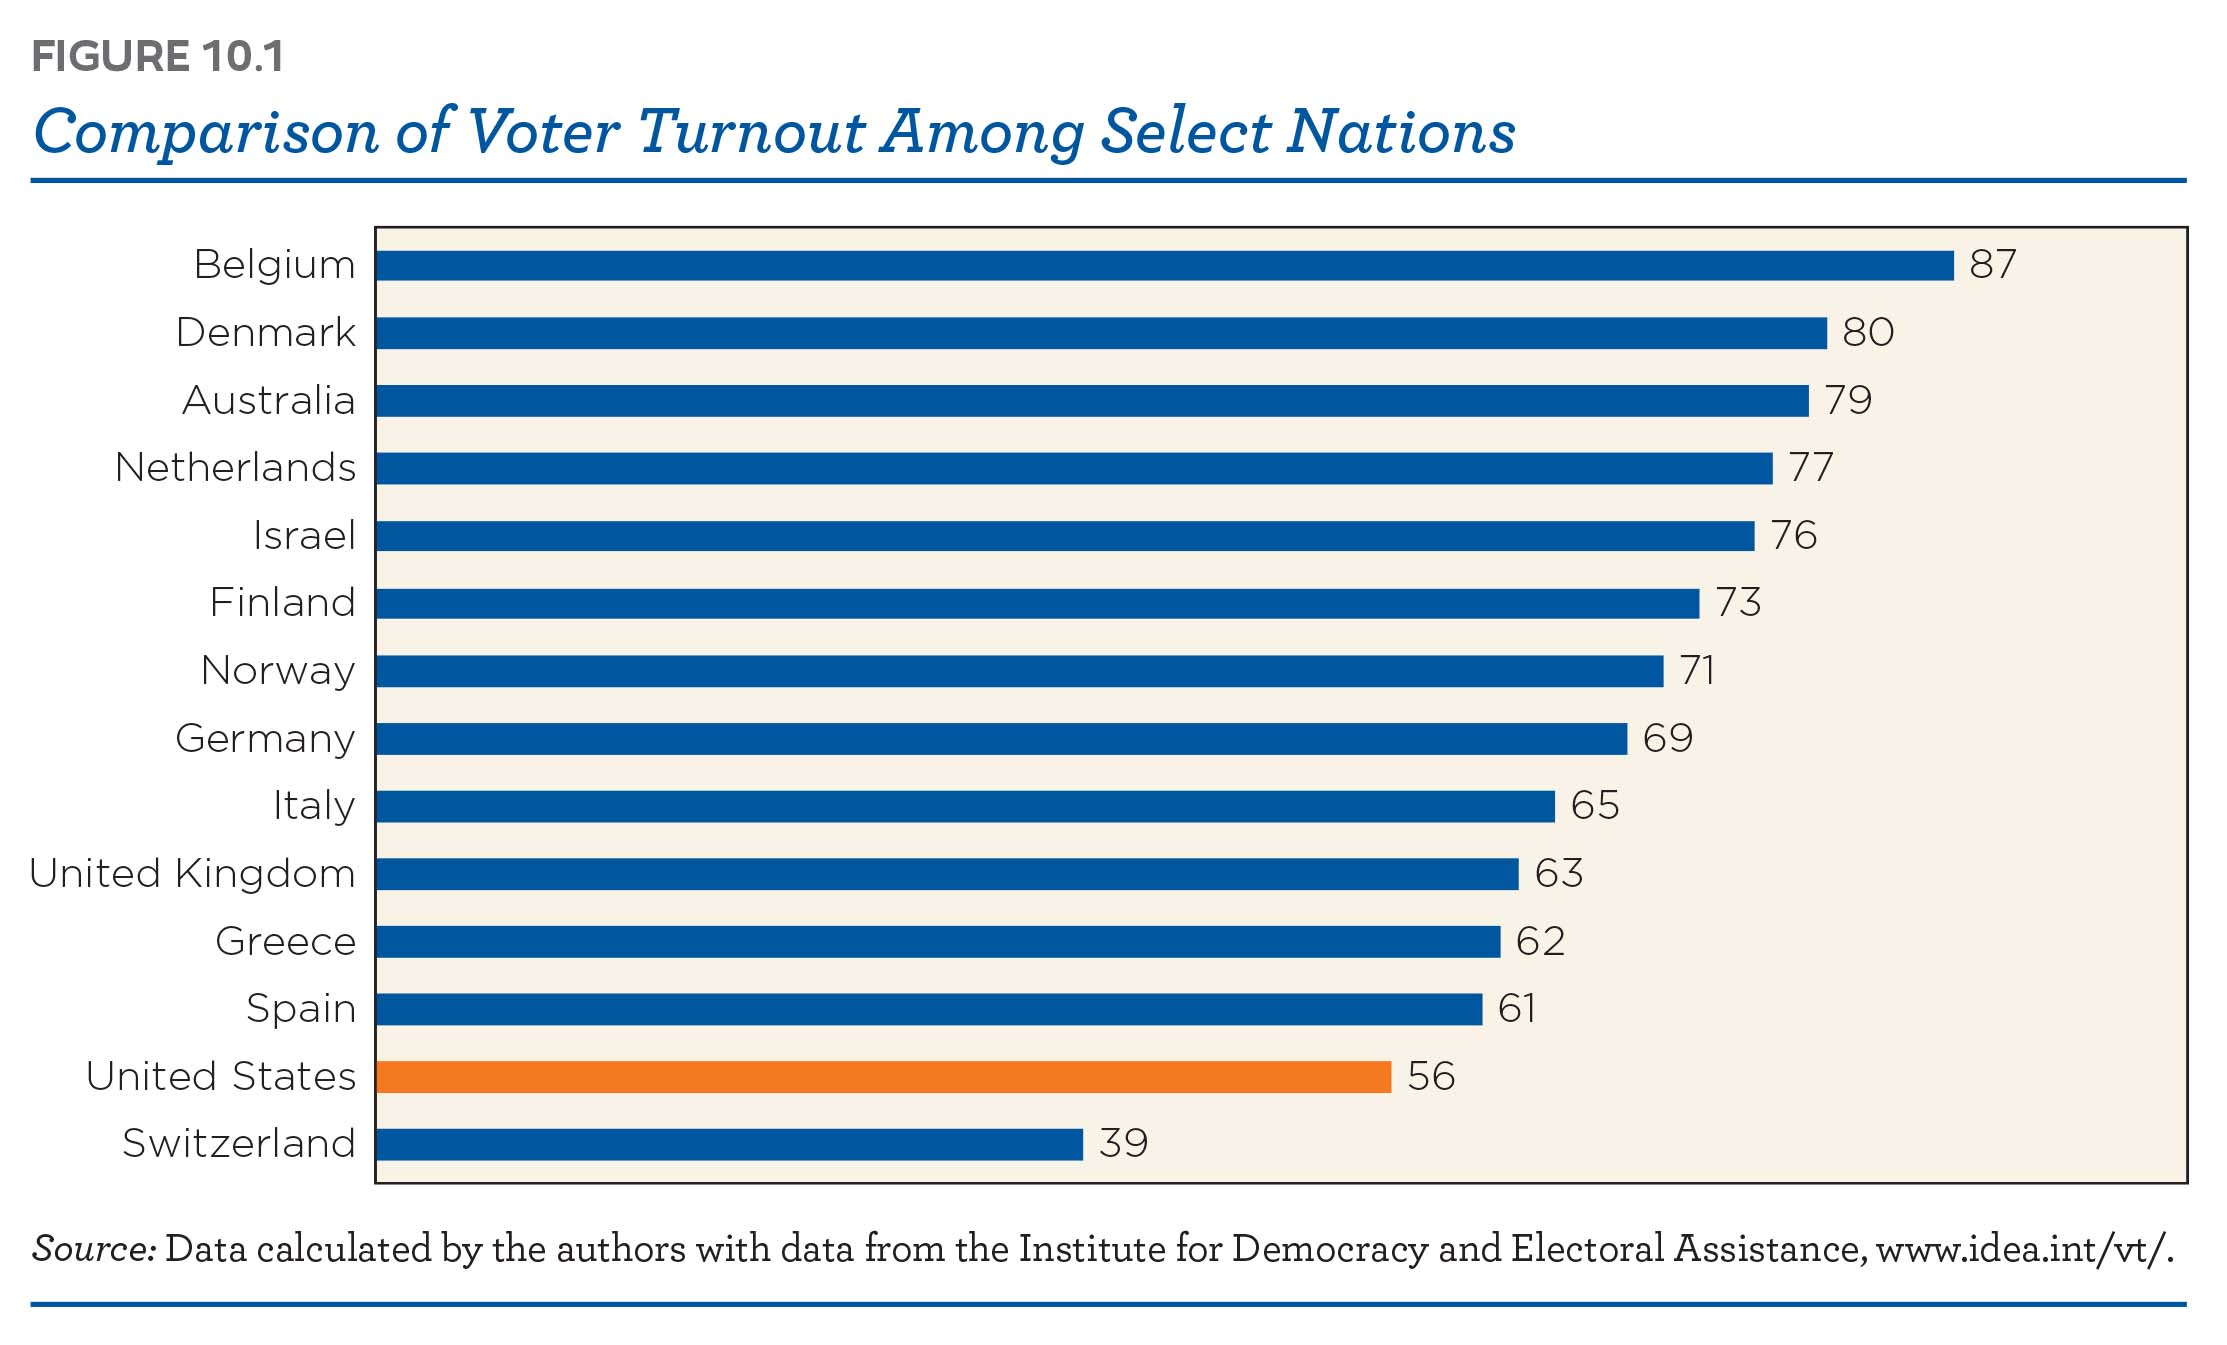 Comparison of Voter Turnout among select nations